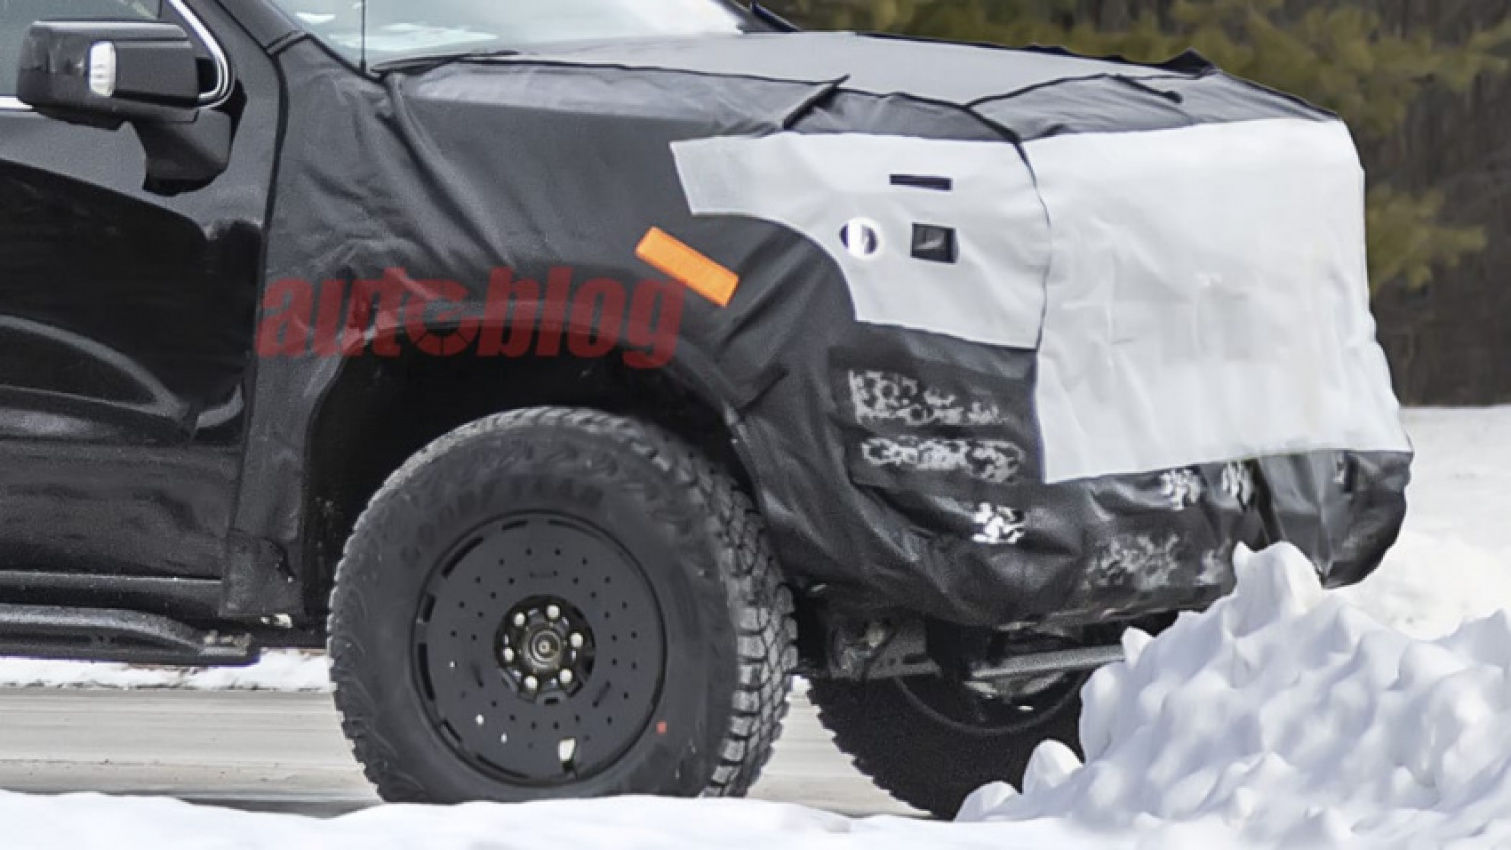 autos, cars, gmc, gmc sierra, off-road vehicles, spy photos, truck, gmc sierra spied with zr2-style off-road modifications